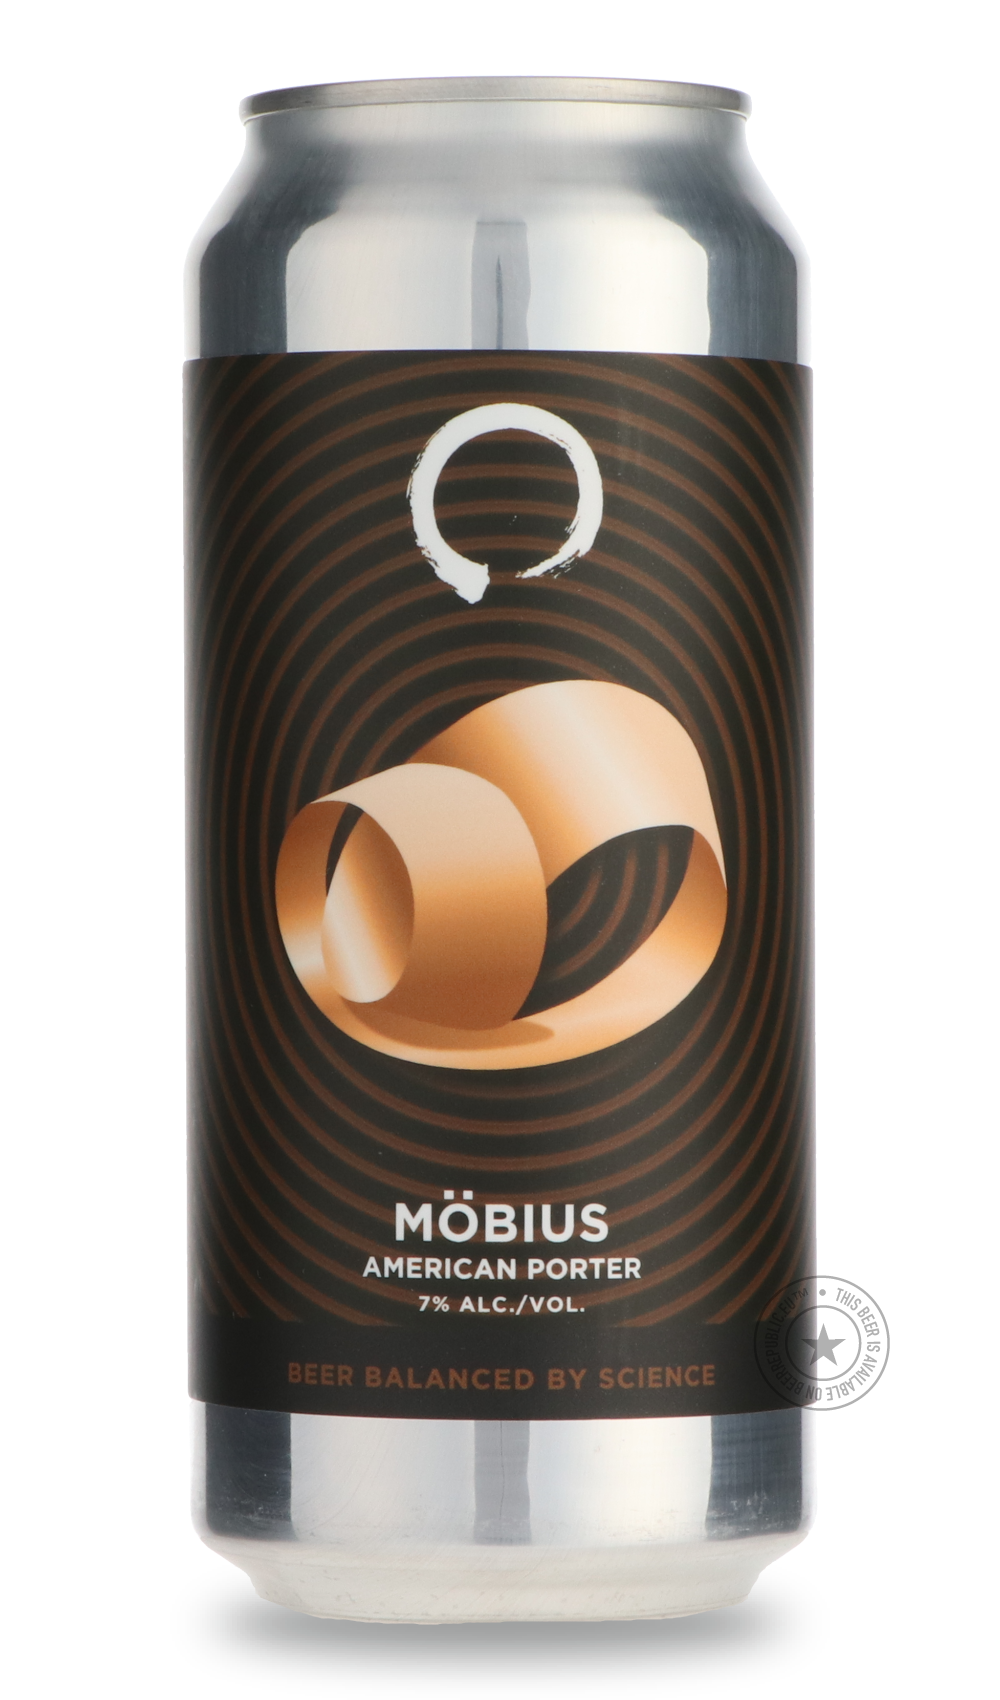 -Equilibrium- Möbius-Stout & Porter- Only @ Beer Republic - The best online beer store for American & Canadian craft beer - Buy beer online from the USA and Canada - Bier online kopen - Amerikaans bier kopen - Craft beer store - Craft beer kopen - Amerikanisch bier kaufen - Bier online kaufen - Acheter biere online - IPA - Stout - Porter - New England IPA - Hazy IPA - Imperial Stout - Barrel Aged - Barrel Aged Imperial Stout - Brown - Dark beer - Blond - Blonde - Pilsner - Lager - Wheat - Weizen - Amber - B